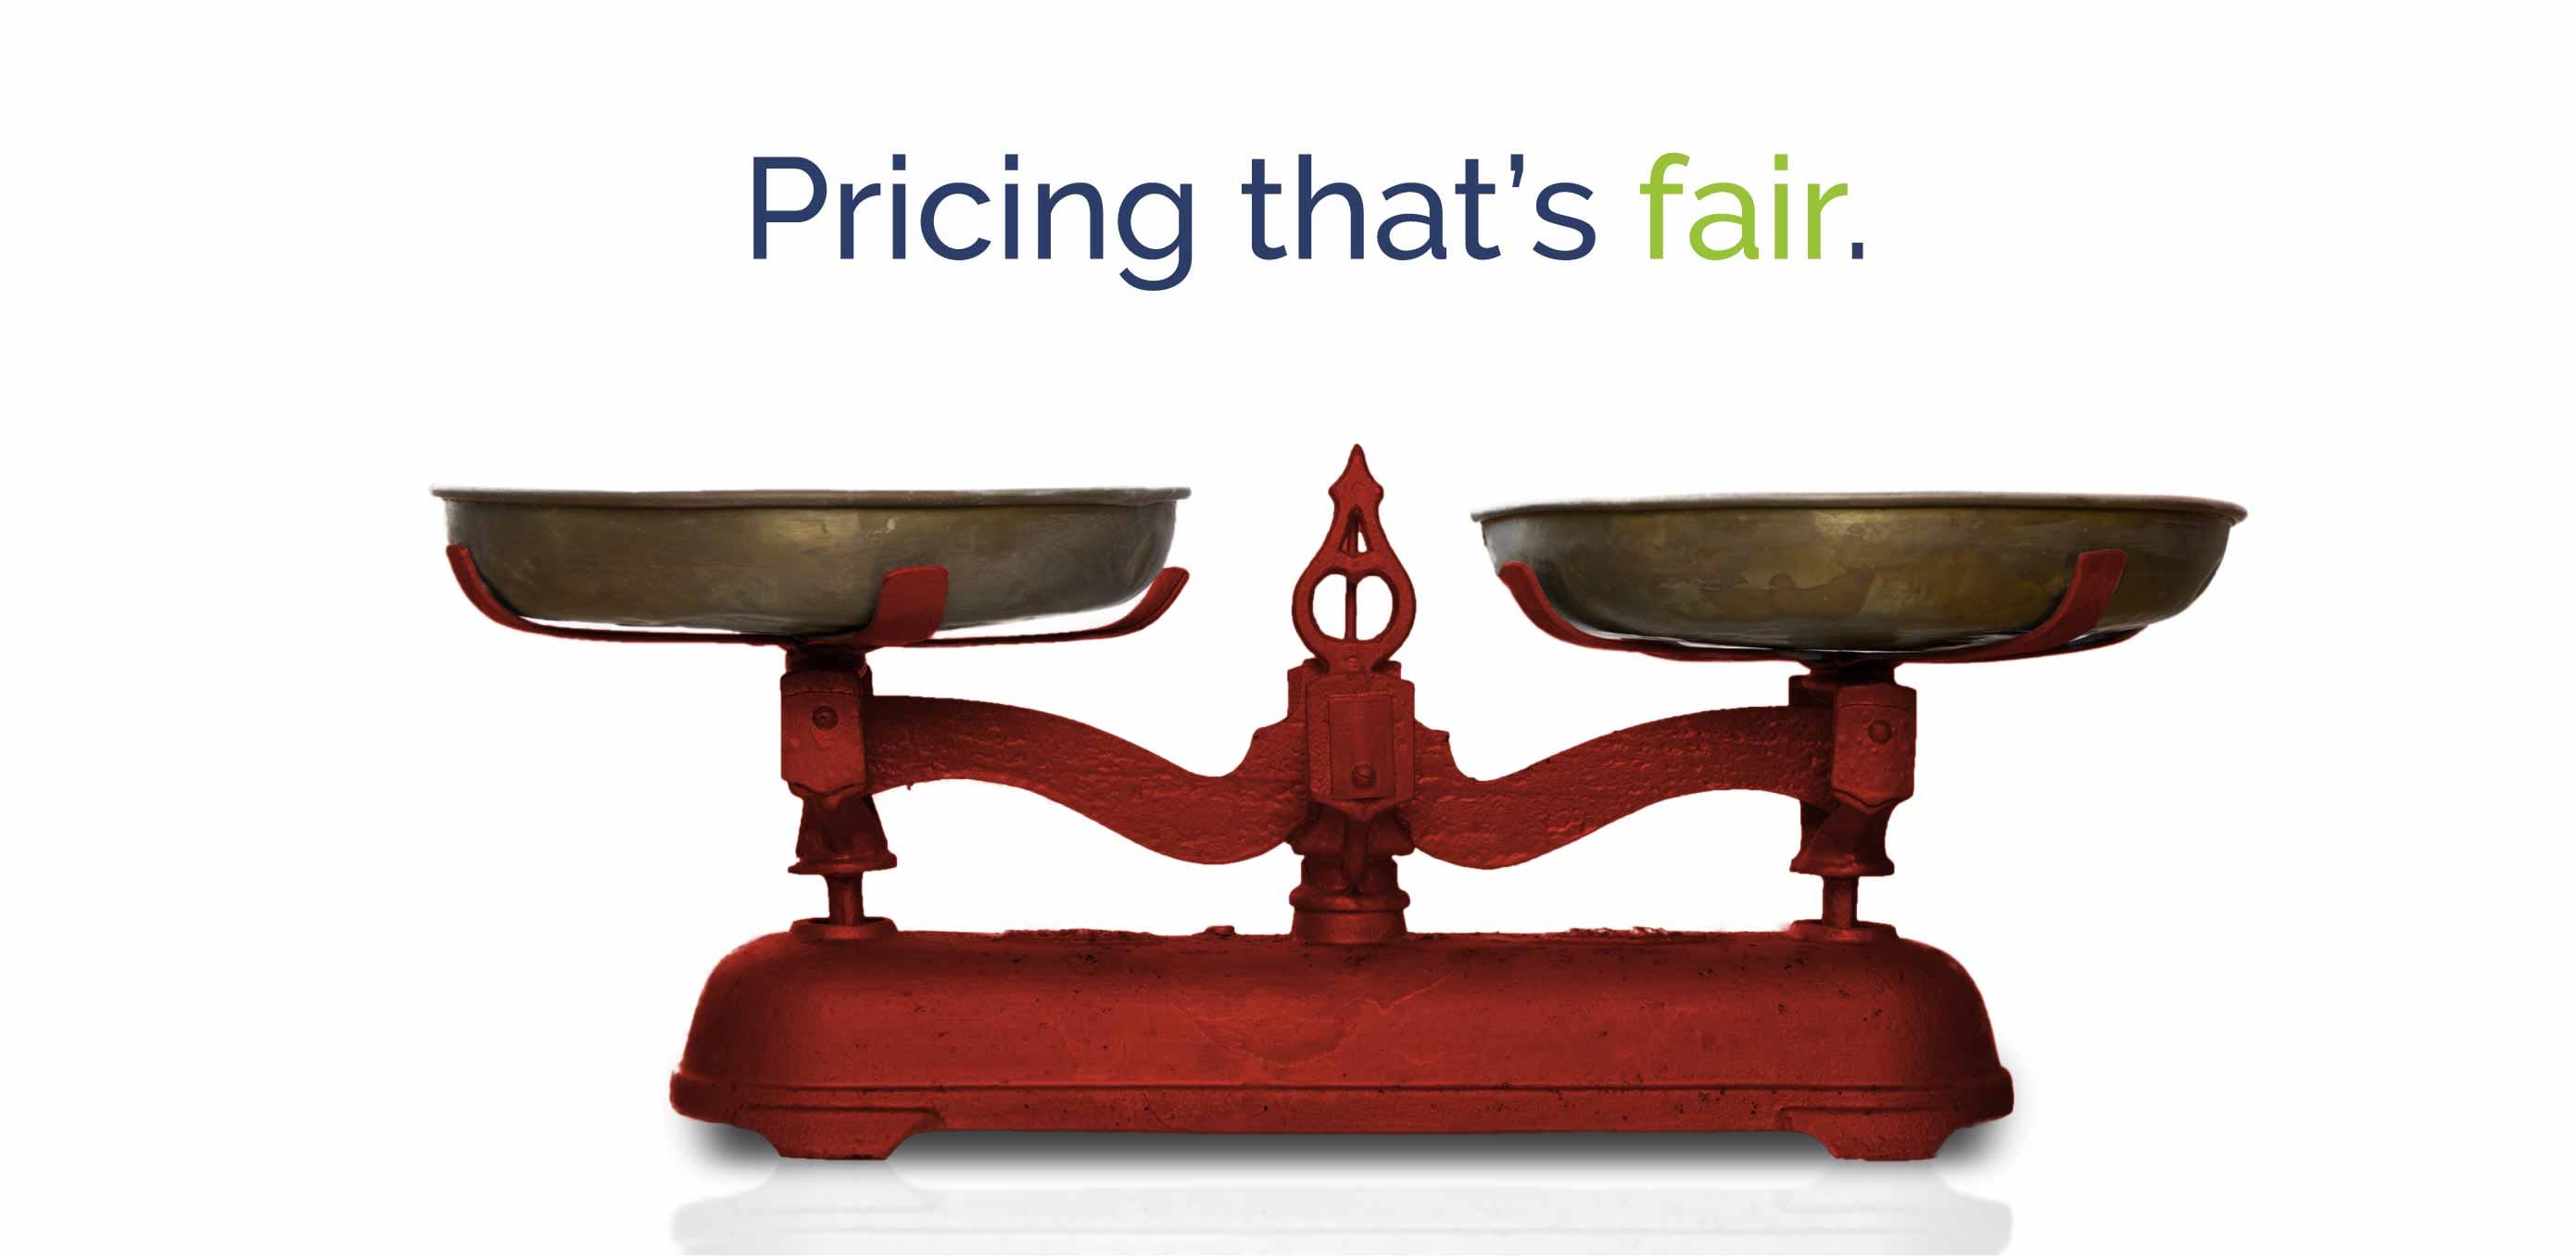 Fixed Fee Lawyers - Pricing That's Fair